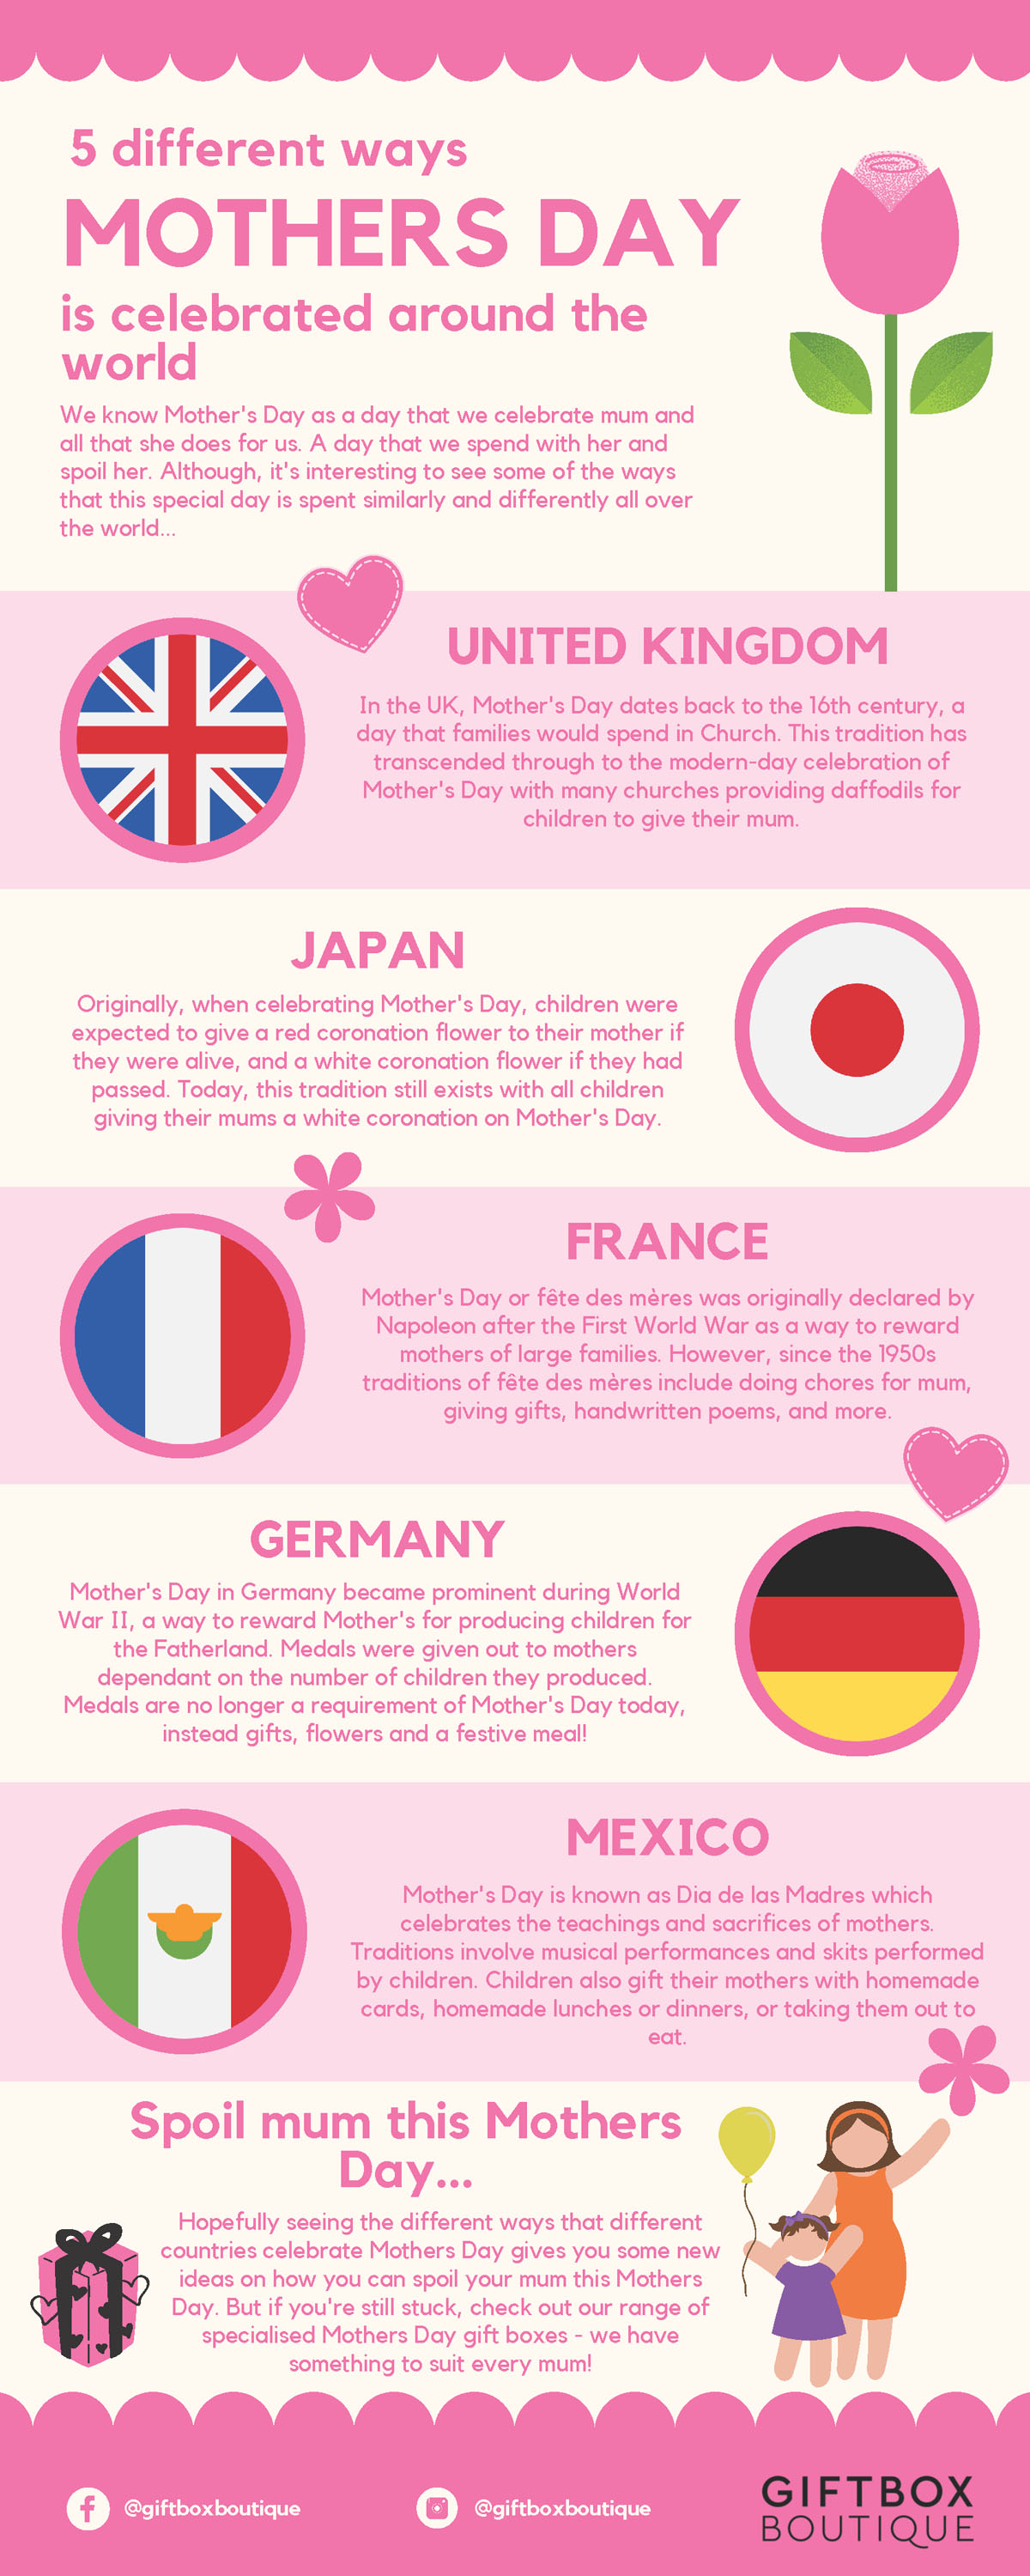 5 Different Ways Mother's Day is Celebrated Around the World